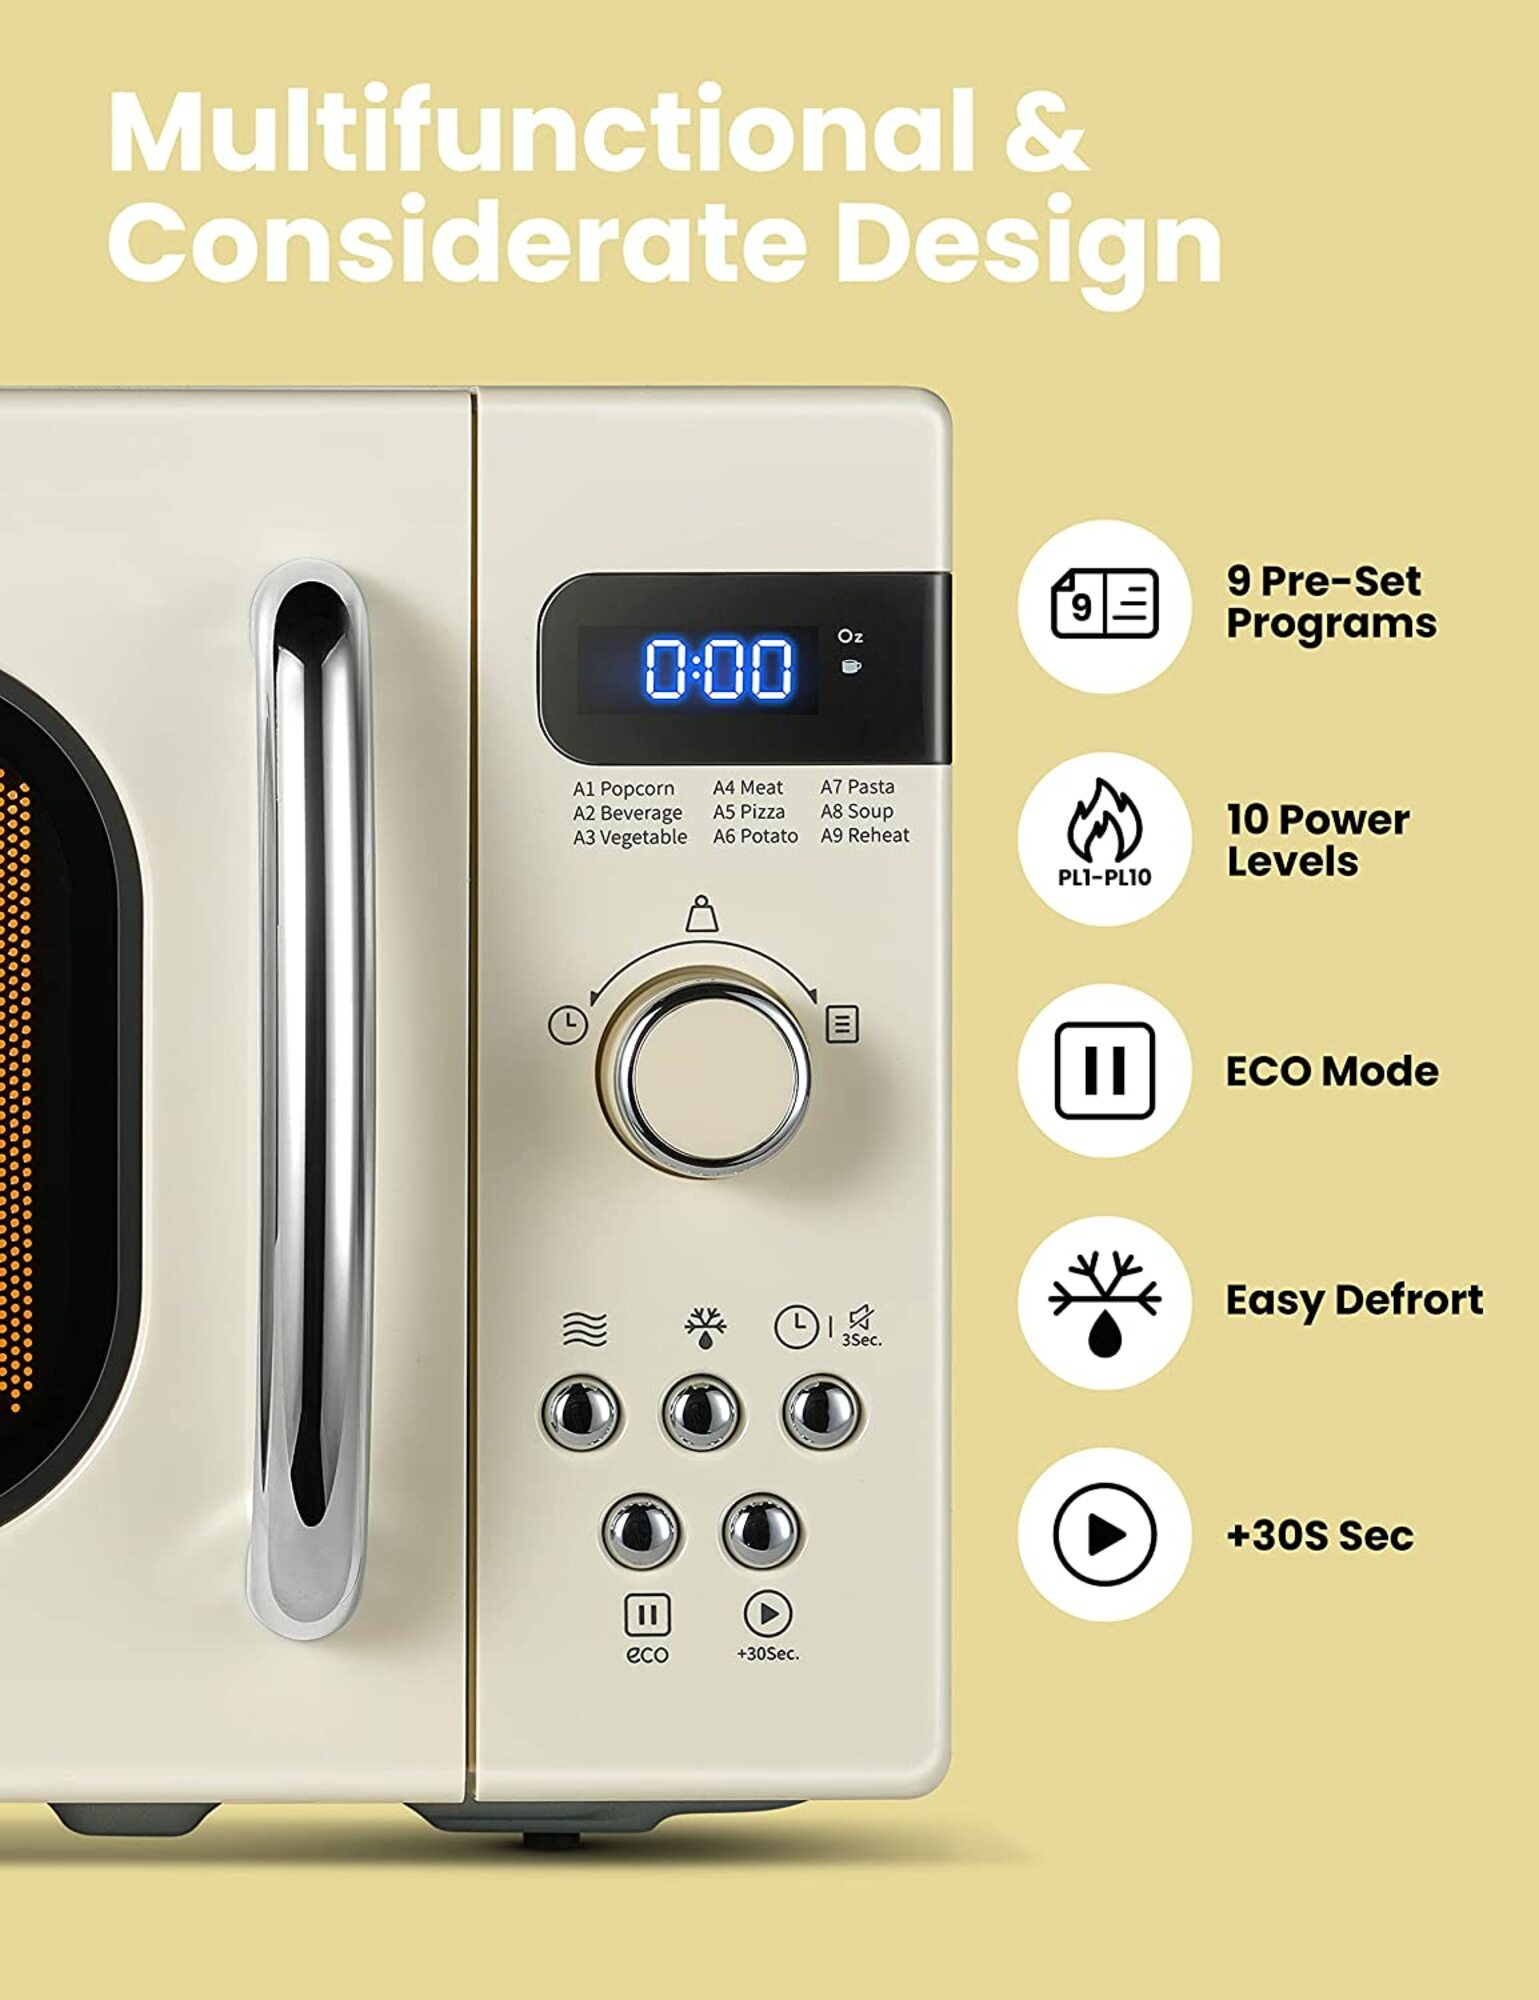 COMFEE' Retro Small Microwave Oven W Compact Size 9 Preset Menus,  Position-Memory Turntable Mute Function, Countertop Microwave Perfect For Small  Spaces 0.7 Cu Ft/700W Cream AM720C2RA-A Retro Apricot 